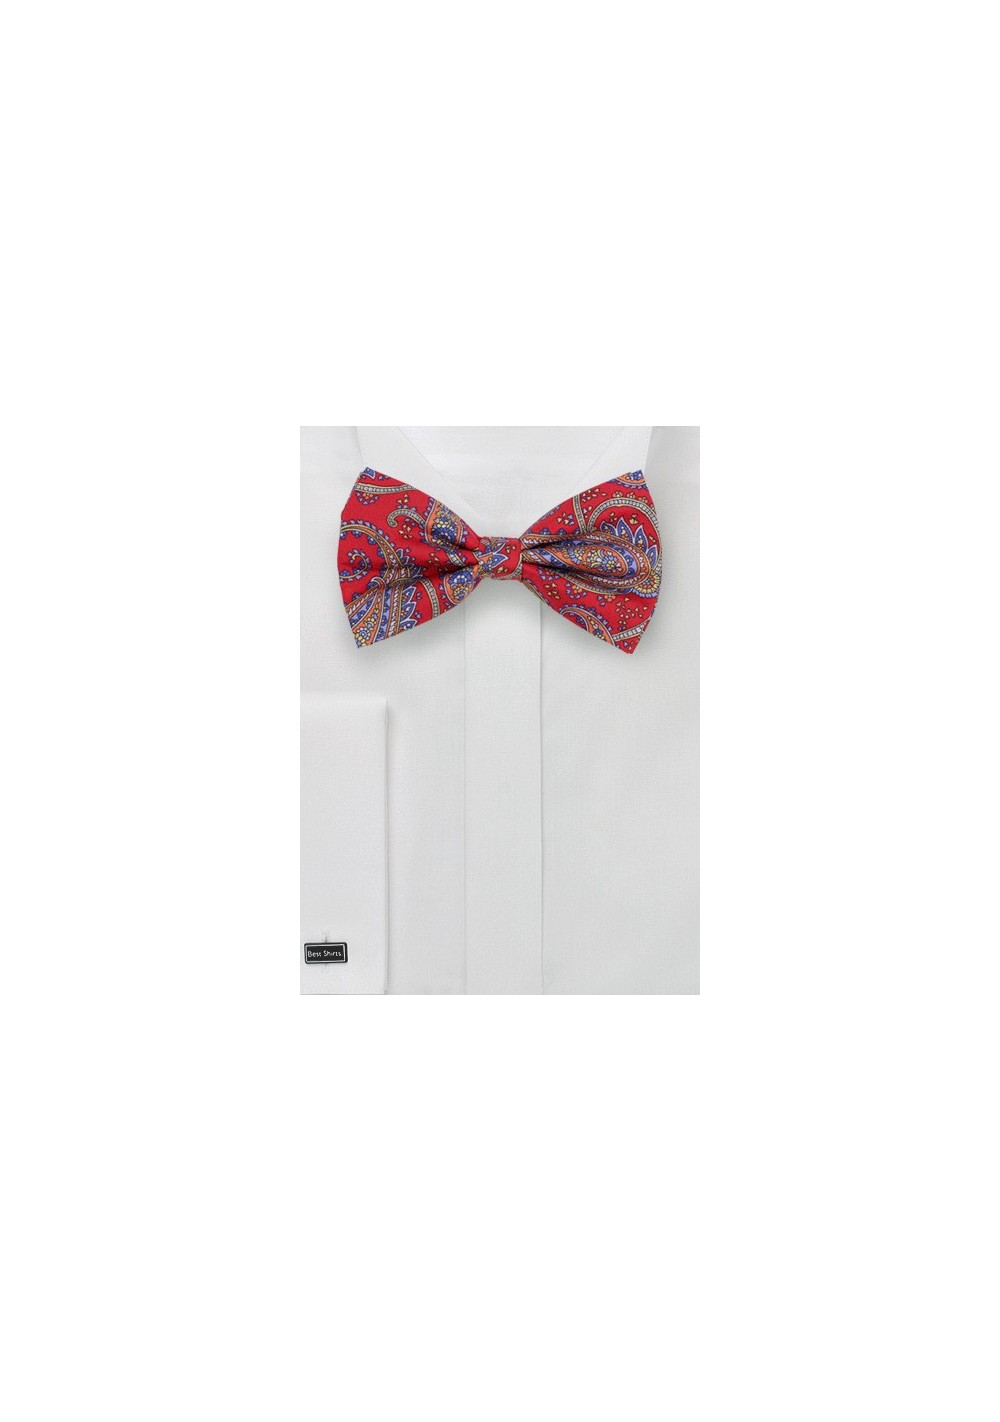 Bold Red Paisley Bow Tie